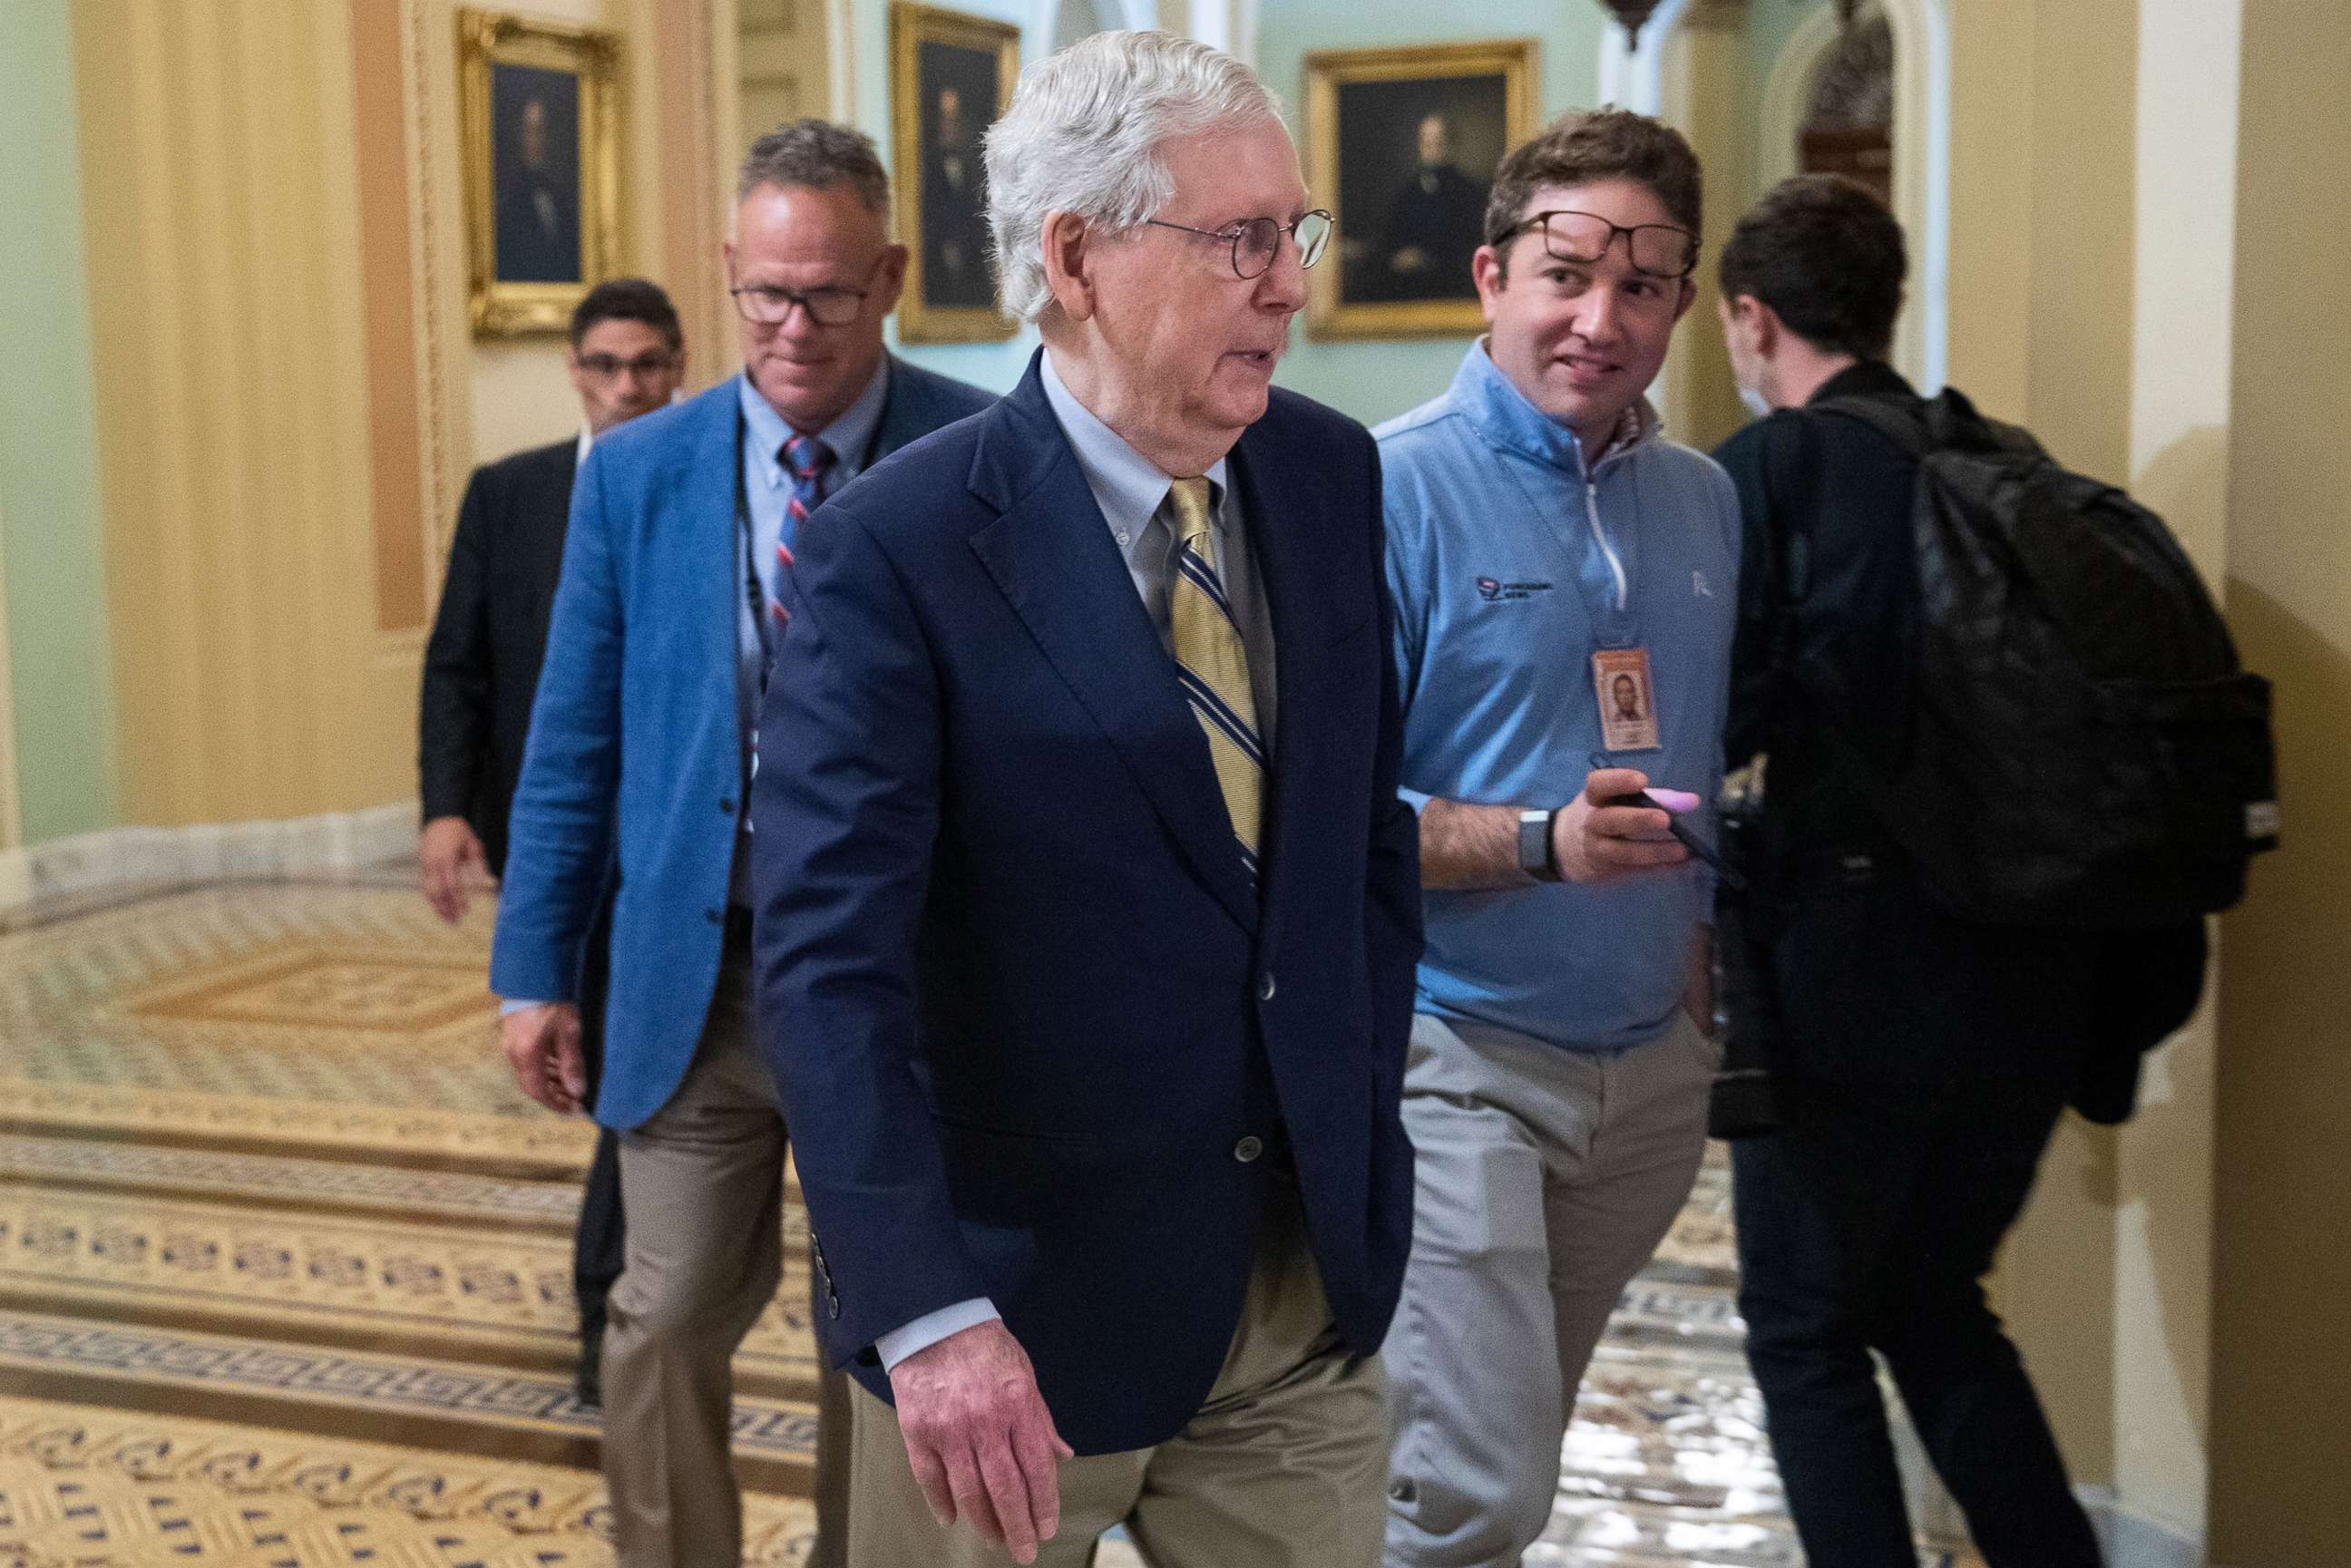 PHOTO: Senate Minority Leader Mitch McConnell responds to a question from the journalists as he walks to his office in the US Capitol in Washington, May 28, 2021.